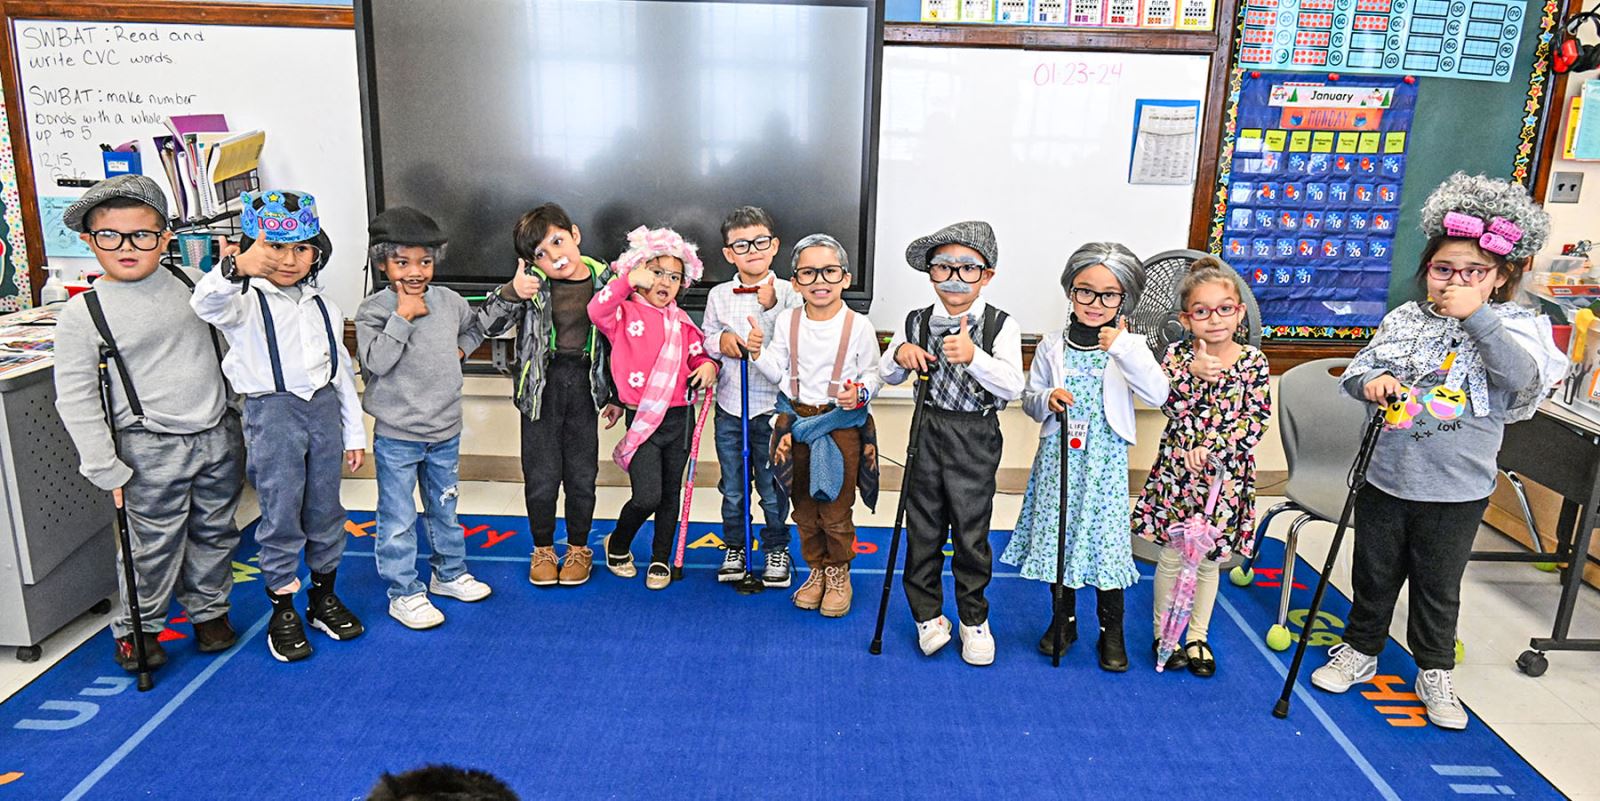 Ms. Lopez's kindergarten class poses for a photo dressed as 100 year olds for the 100th day of school